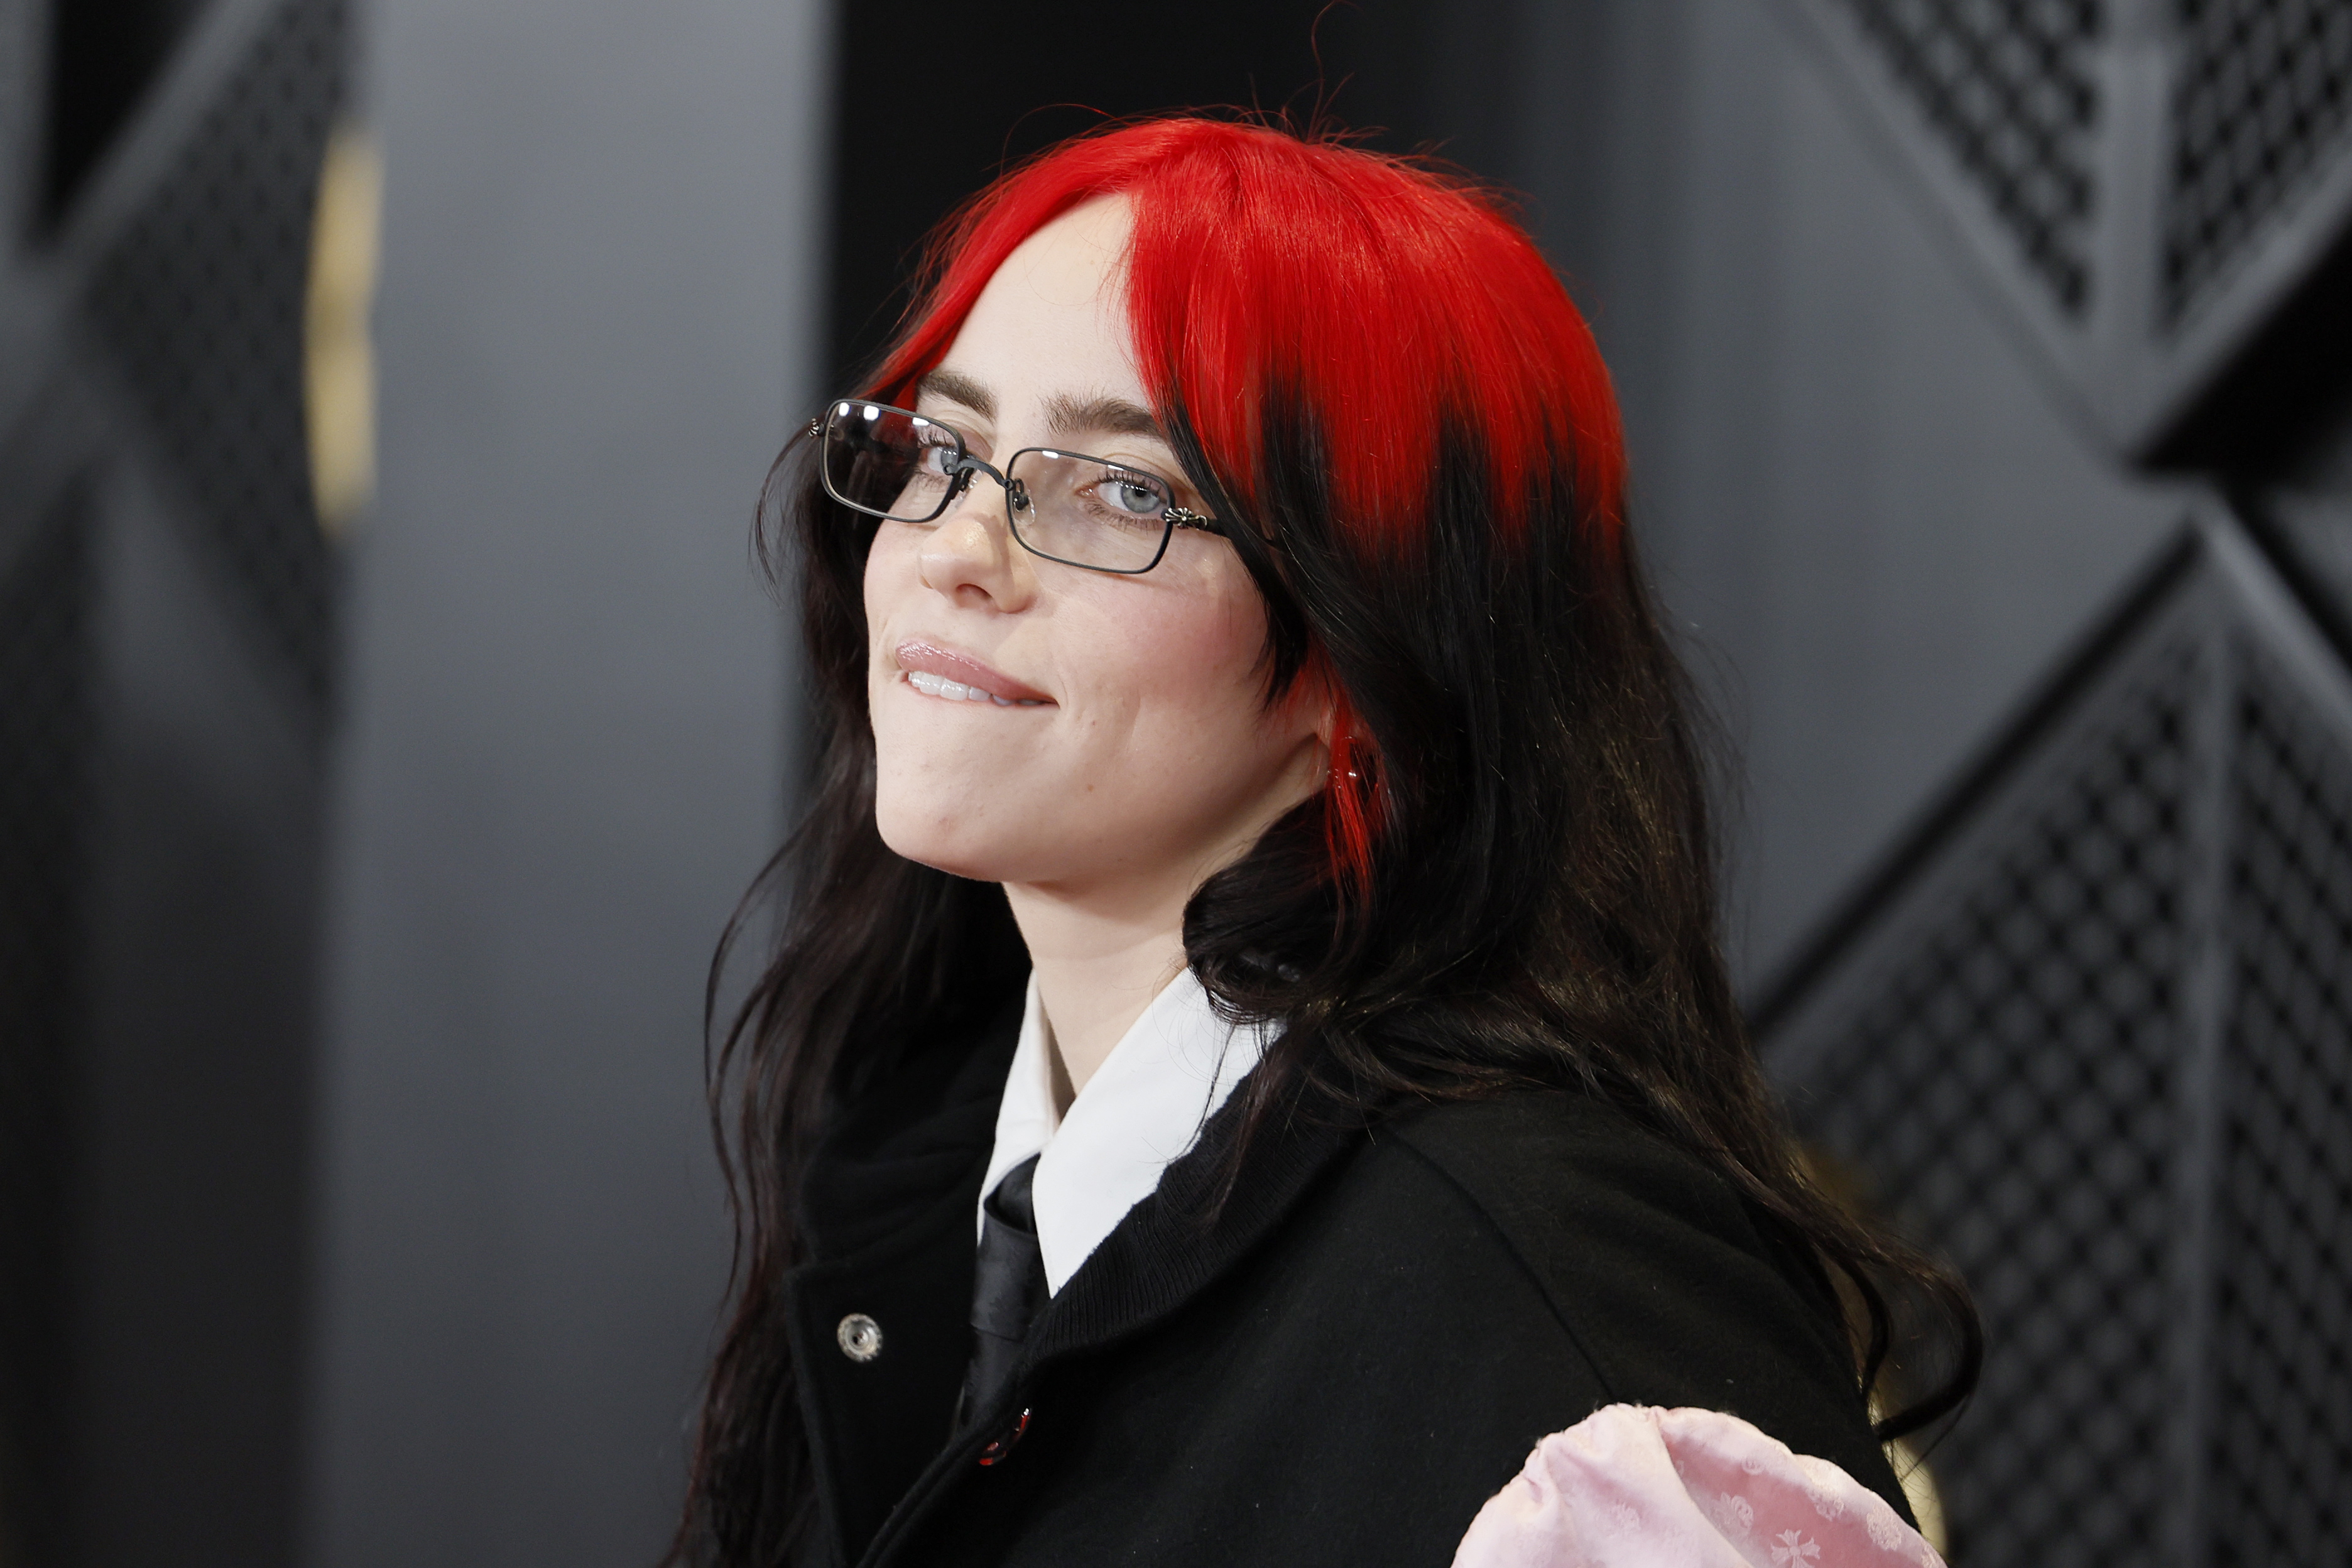 Person with red hair and glasses smiling, wearing a black top and white shirt underneath